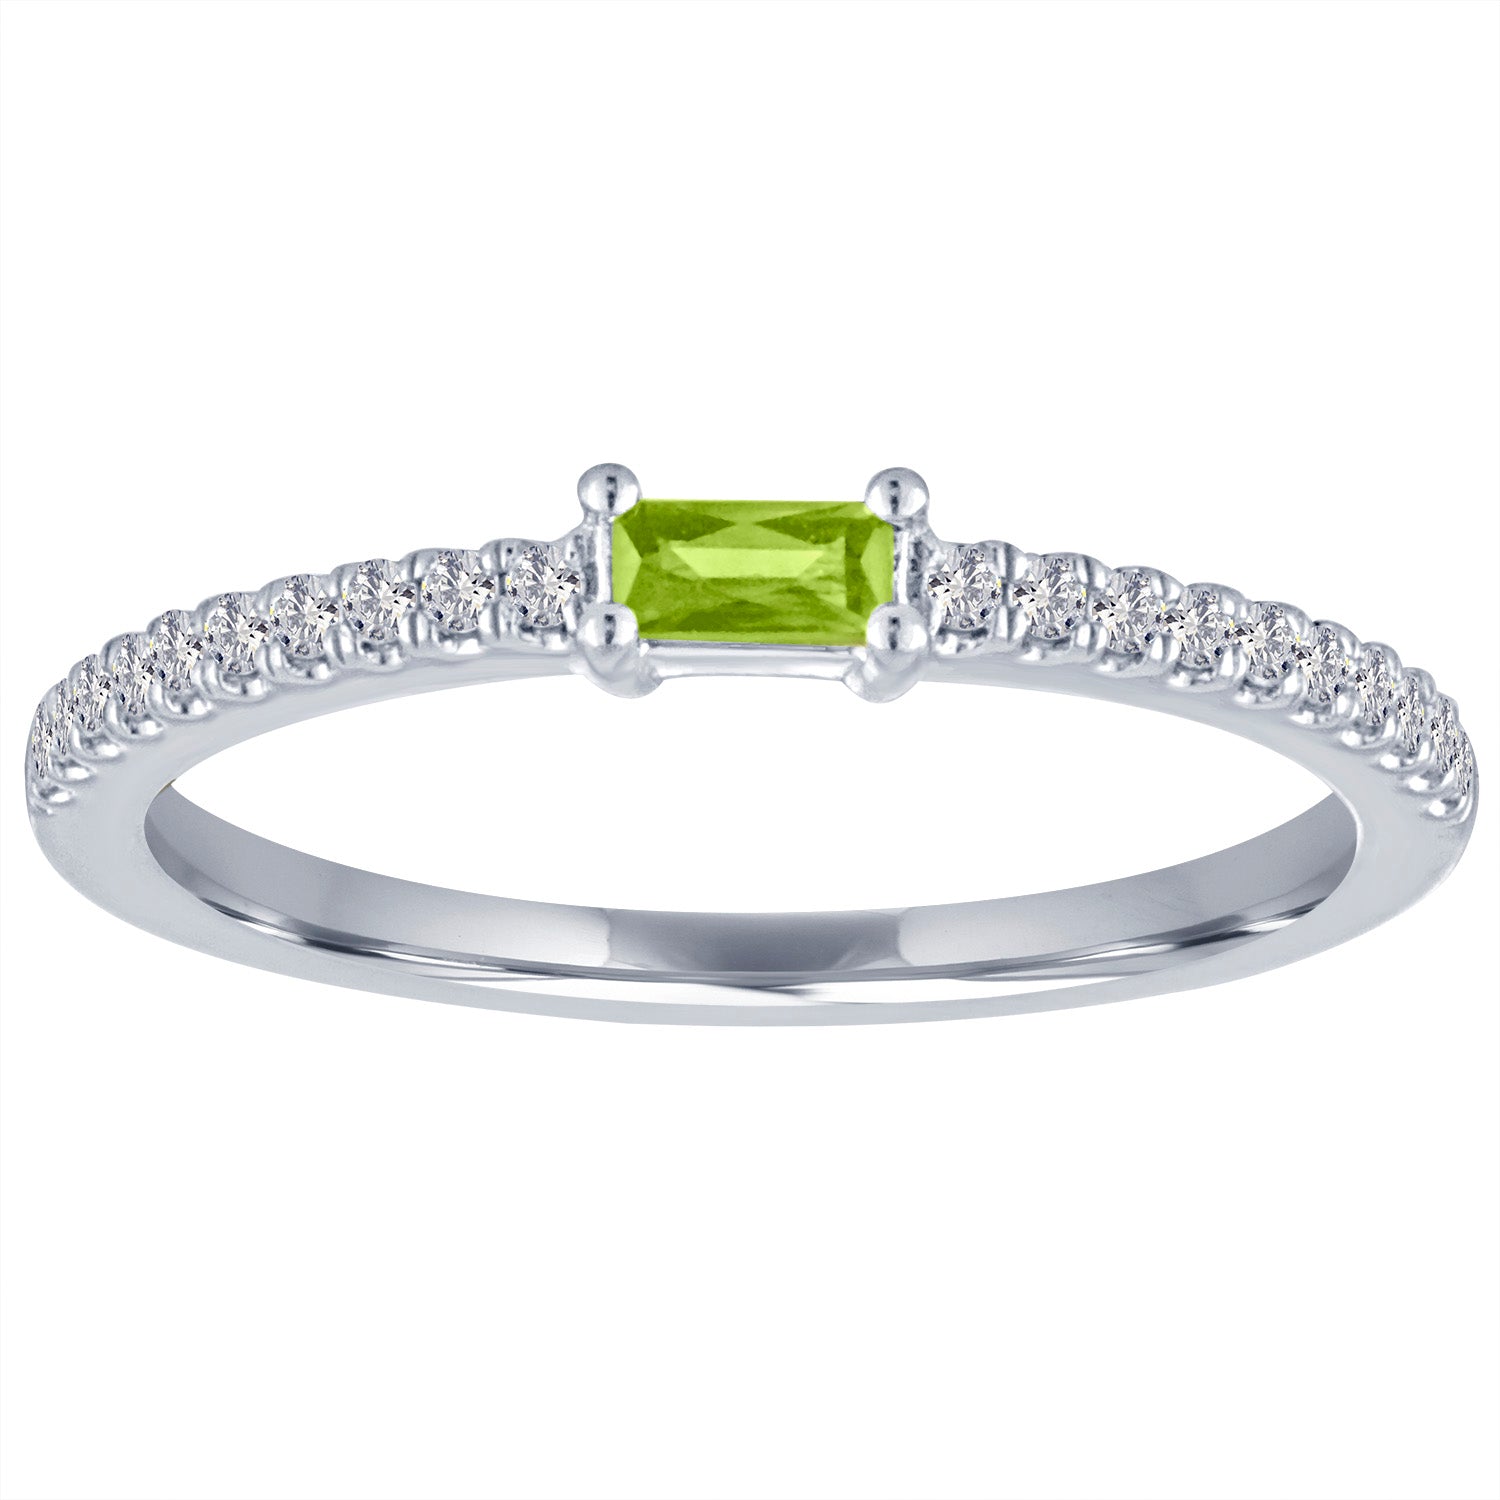 White gold skinny band with a peridot baguette in the center and round diamonds on the shank.